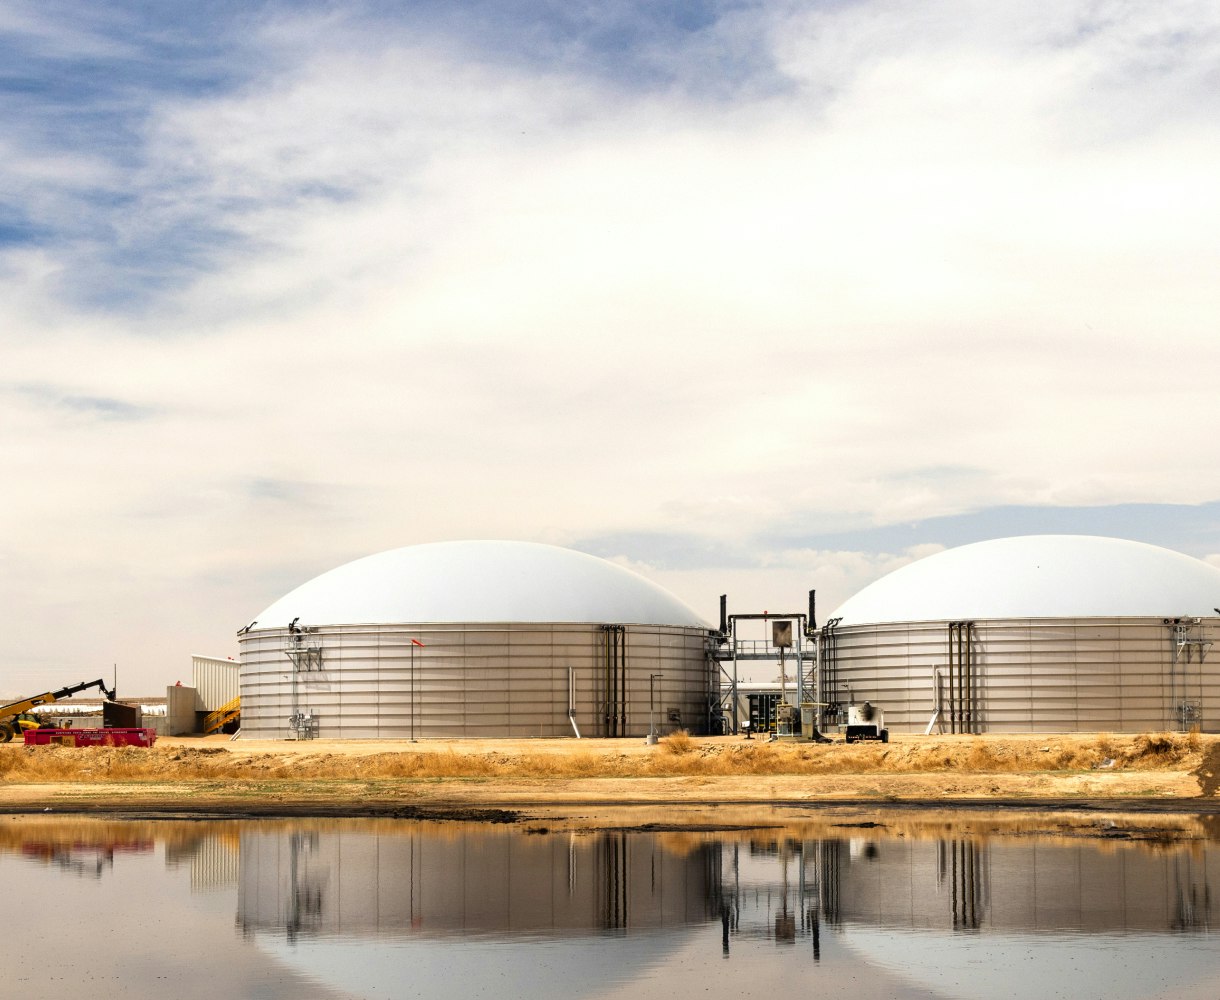 Anaerobic digestion creating renewable energy from food waste recycling